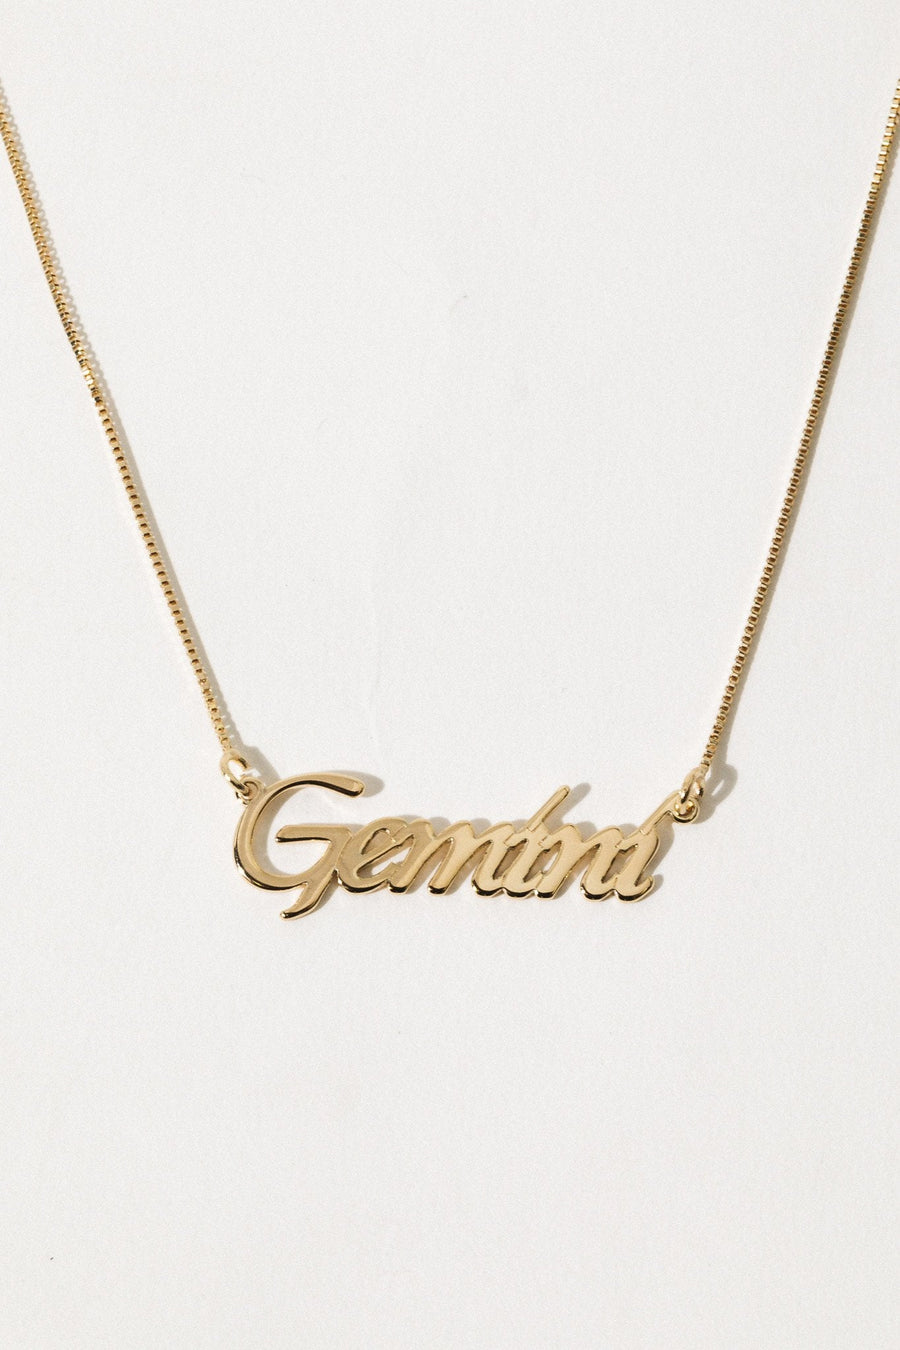 The Goth Booth Jewelry Gemini / Gold / 16 inches Signature Zodiac Necklace